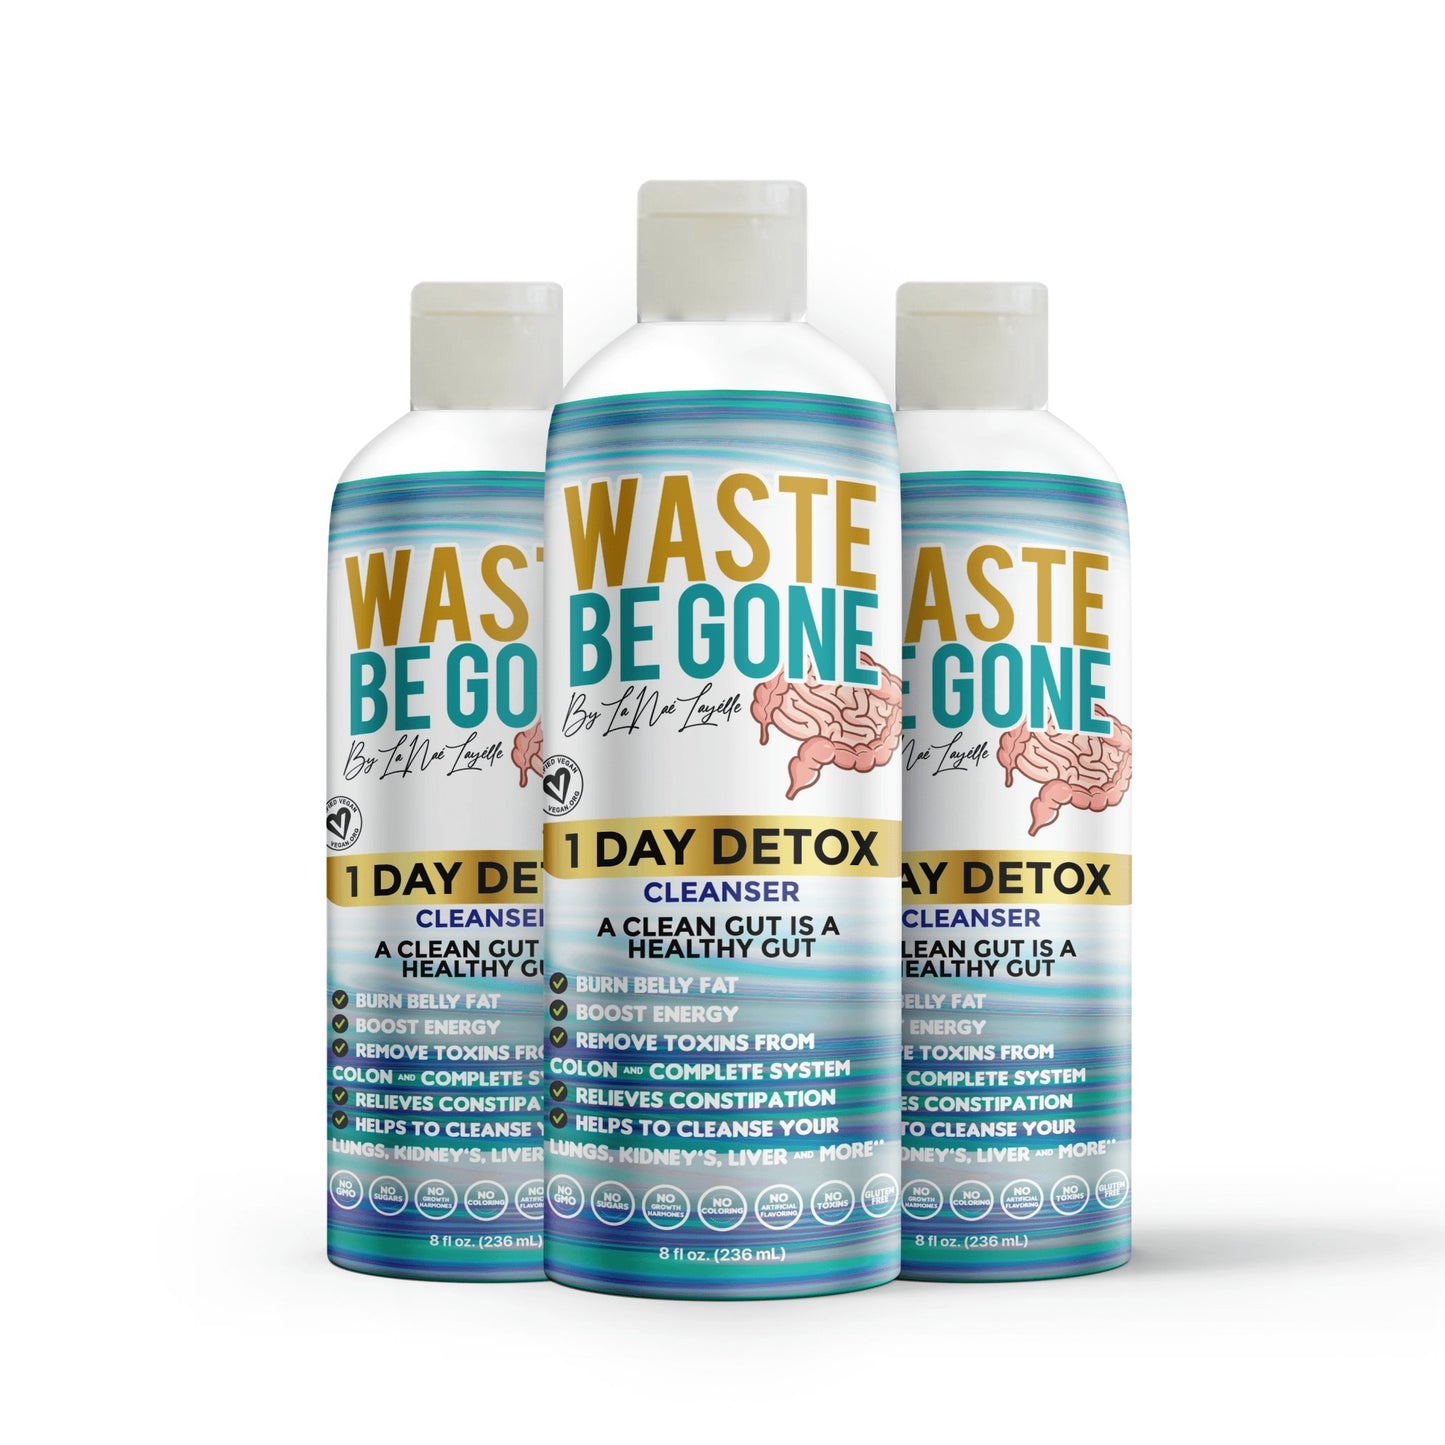 1 Day Cleanser (3 Pack) - Waistbegoneofficial